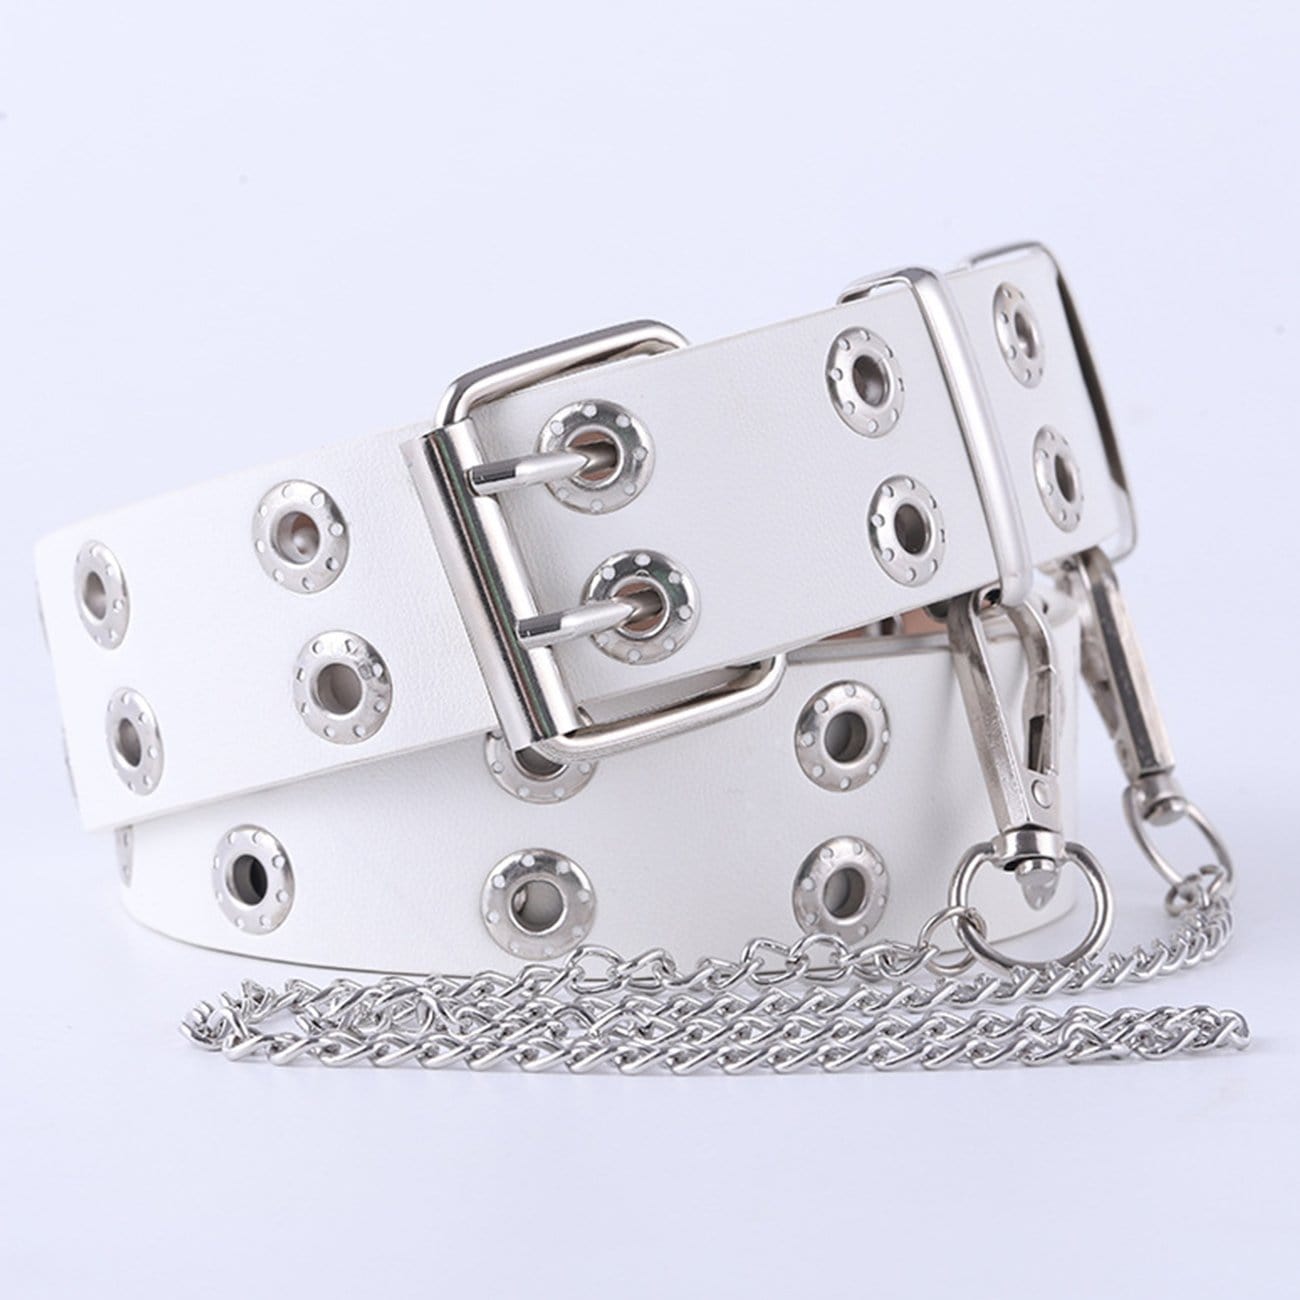 TO Punk Double-Row Eye Buckle Hollow Chain Belt